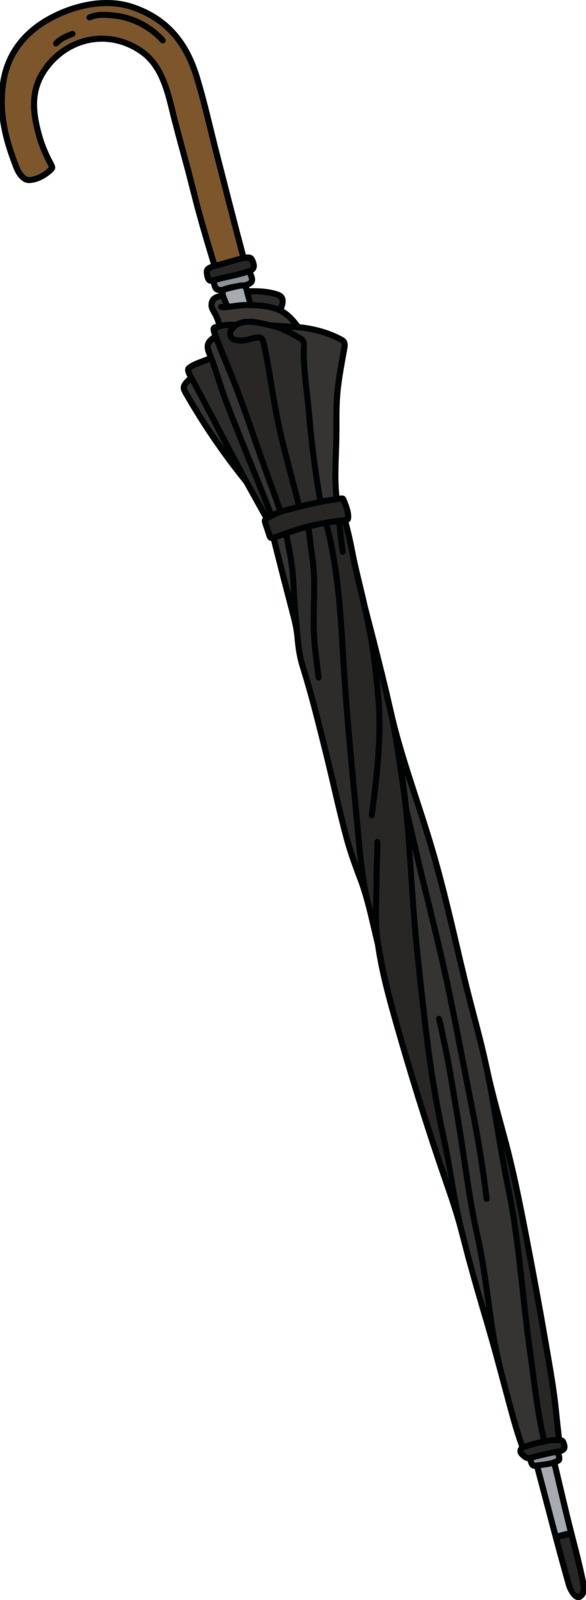 The vectorized hand drawing of a classic black umbrella